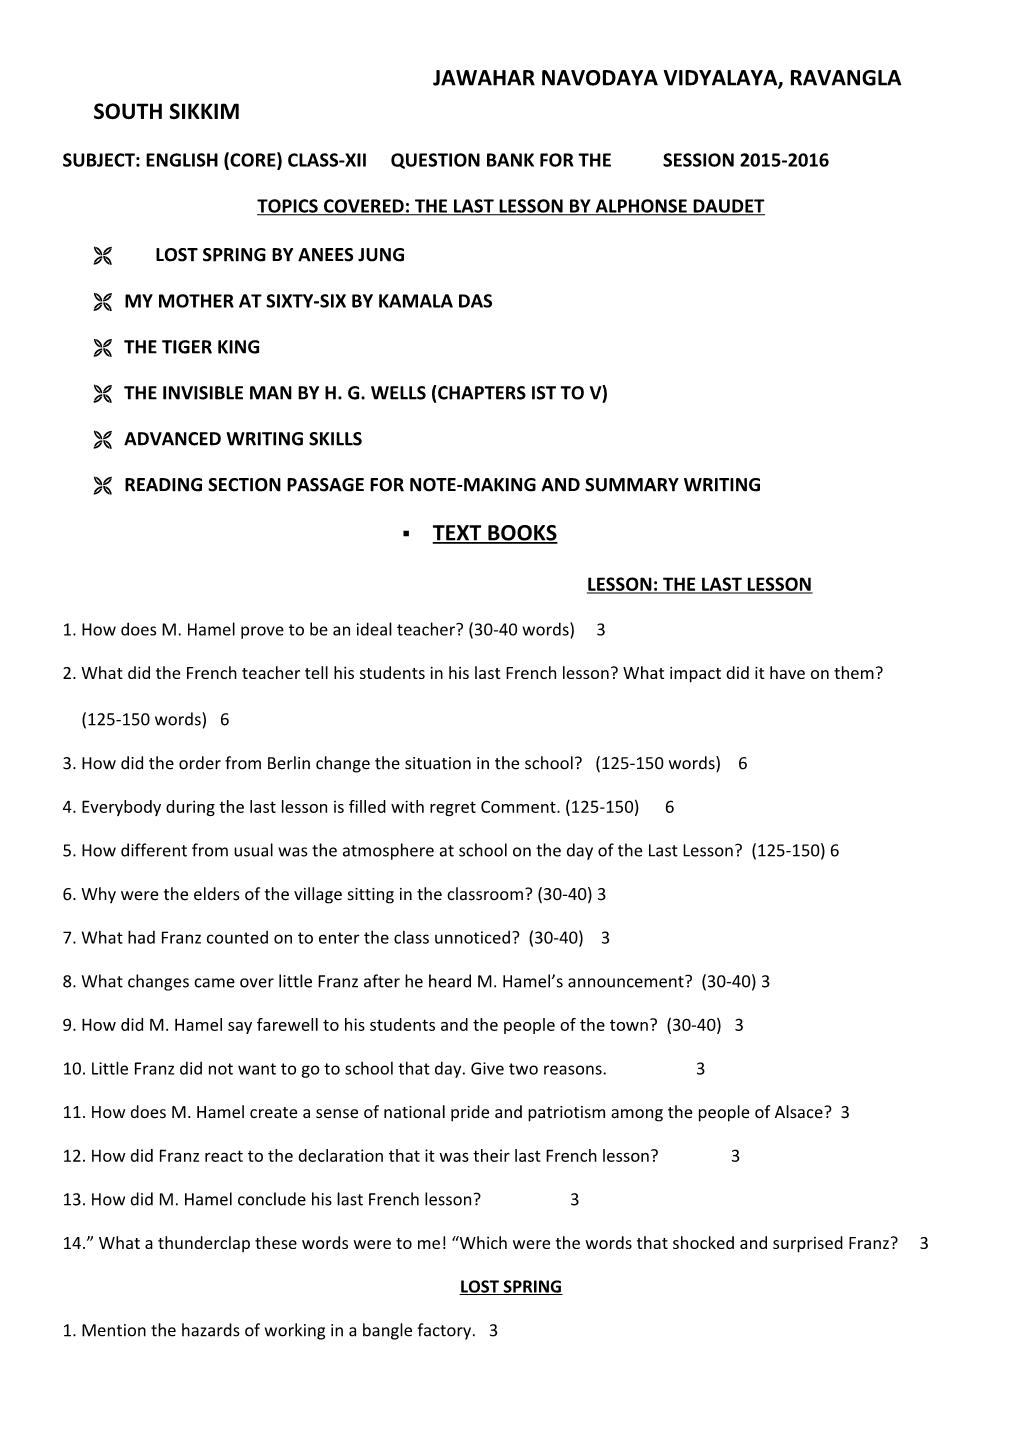 Subject: English (Core) Class-Xii Question Bank for the Session 2015-2016